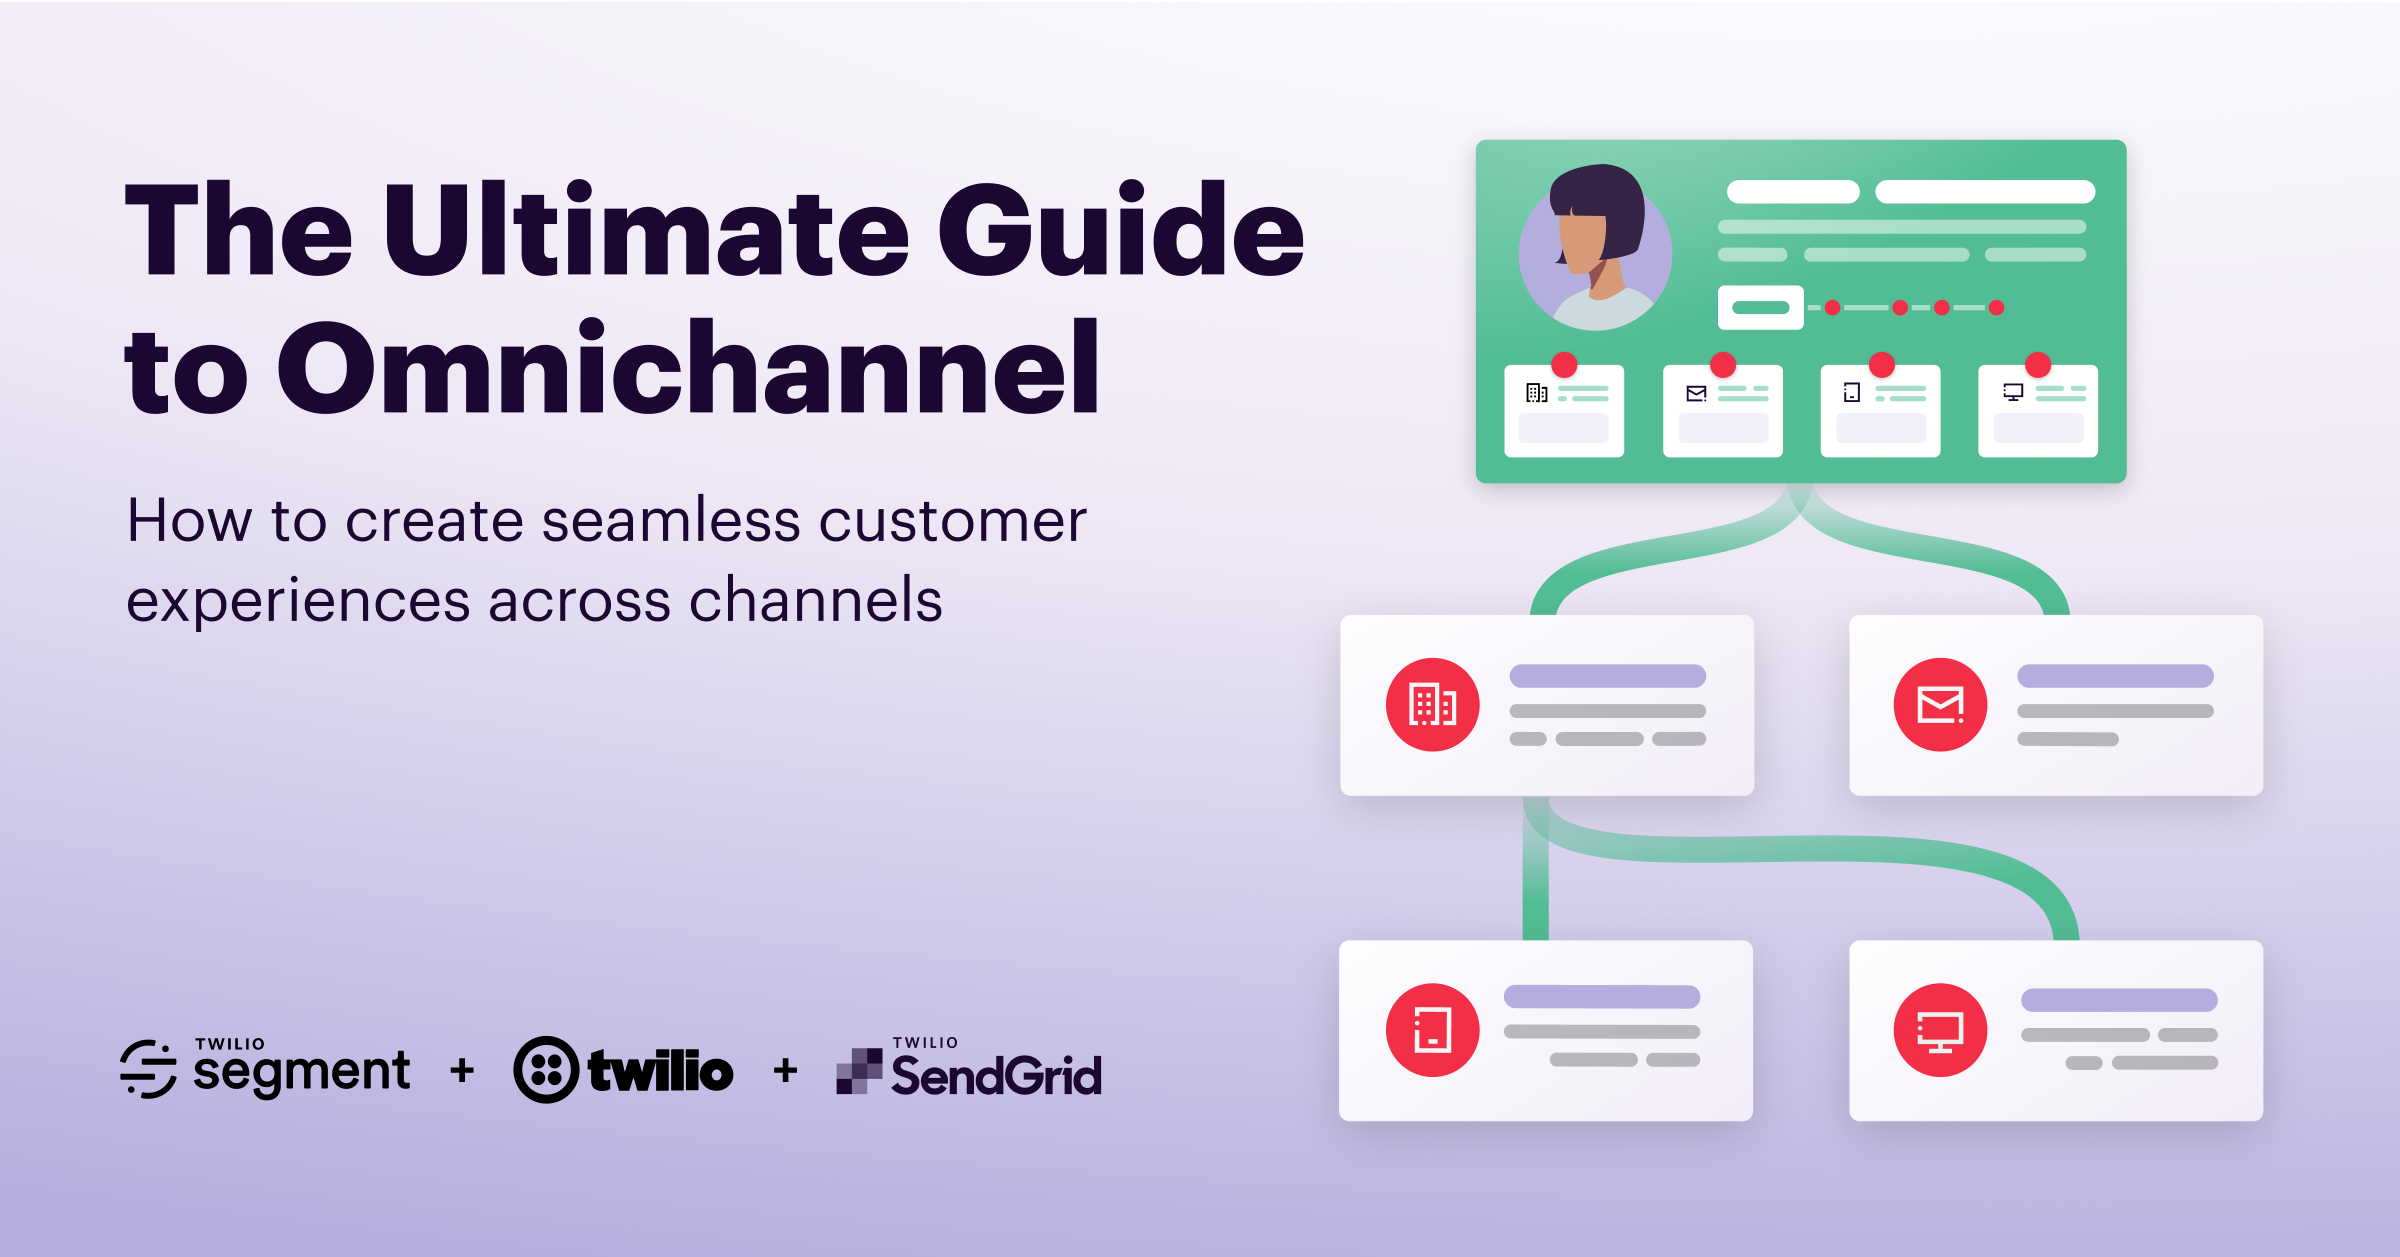 The Ultimate Guide to Omnichannel